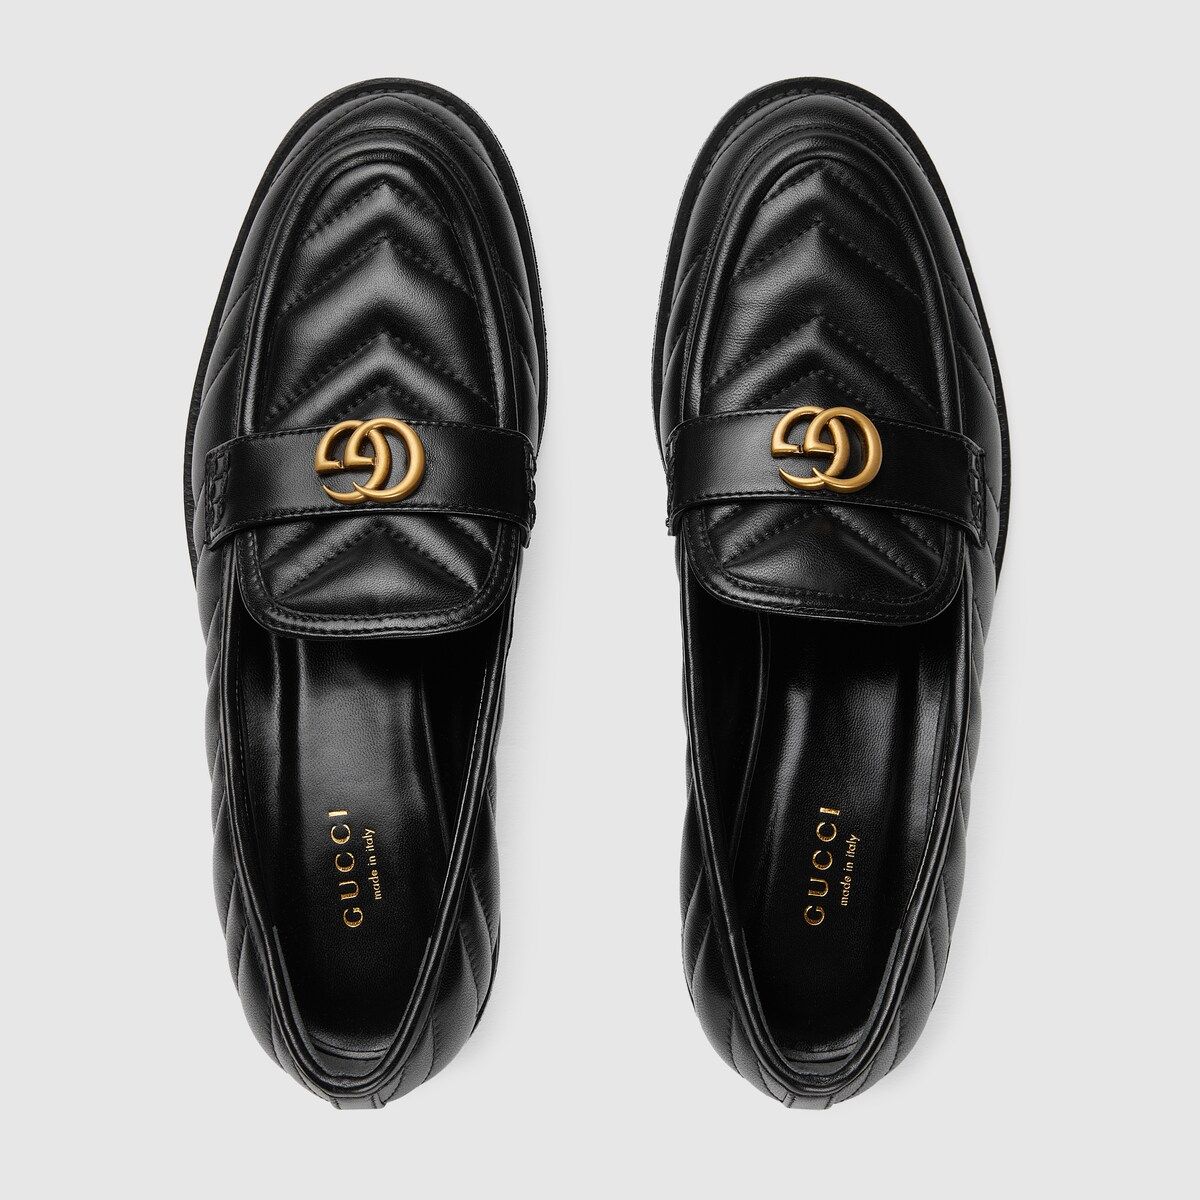 Women's loafer with Double G | Gucci (US)